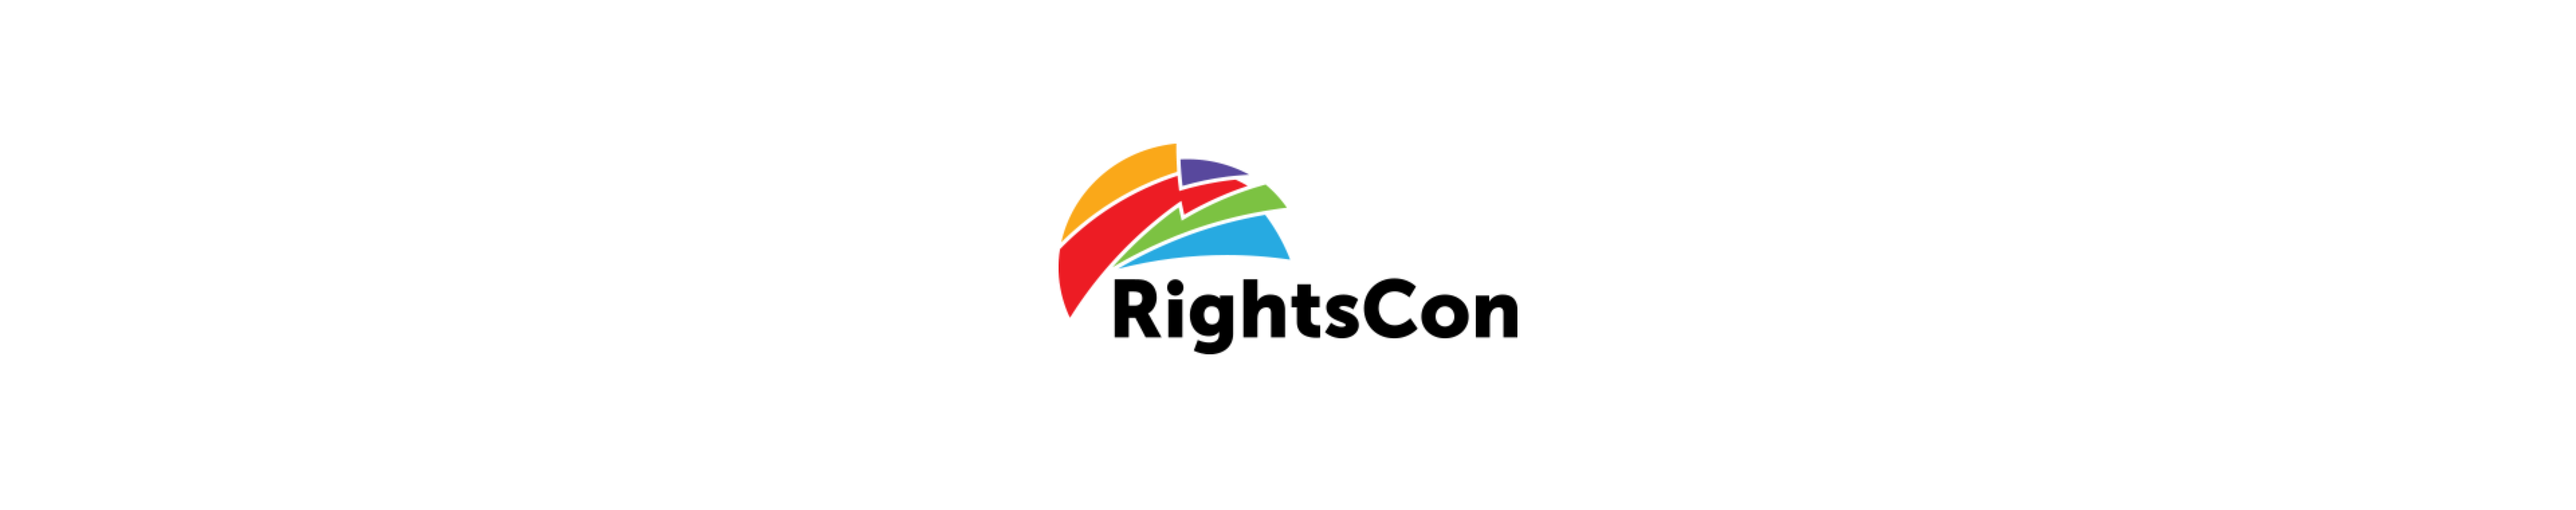 Tresorit at RightsCon: The Business of Privacy